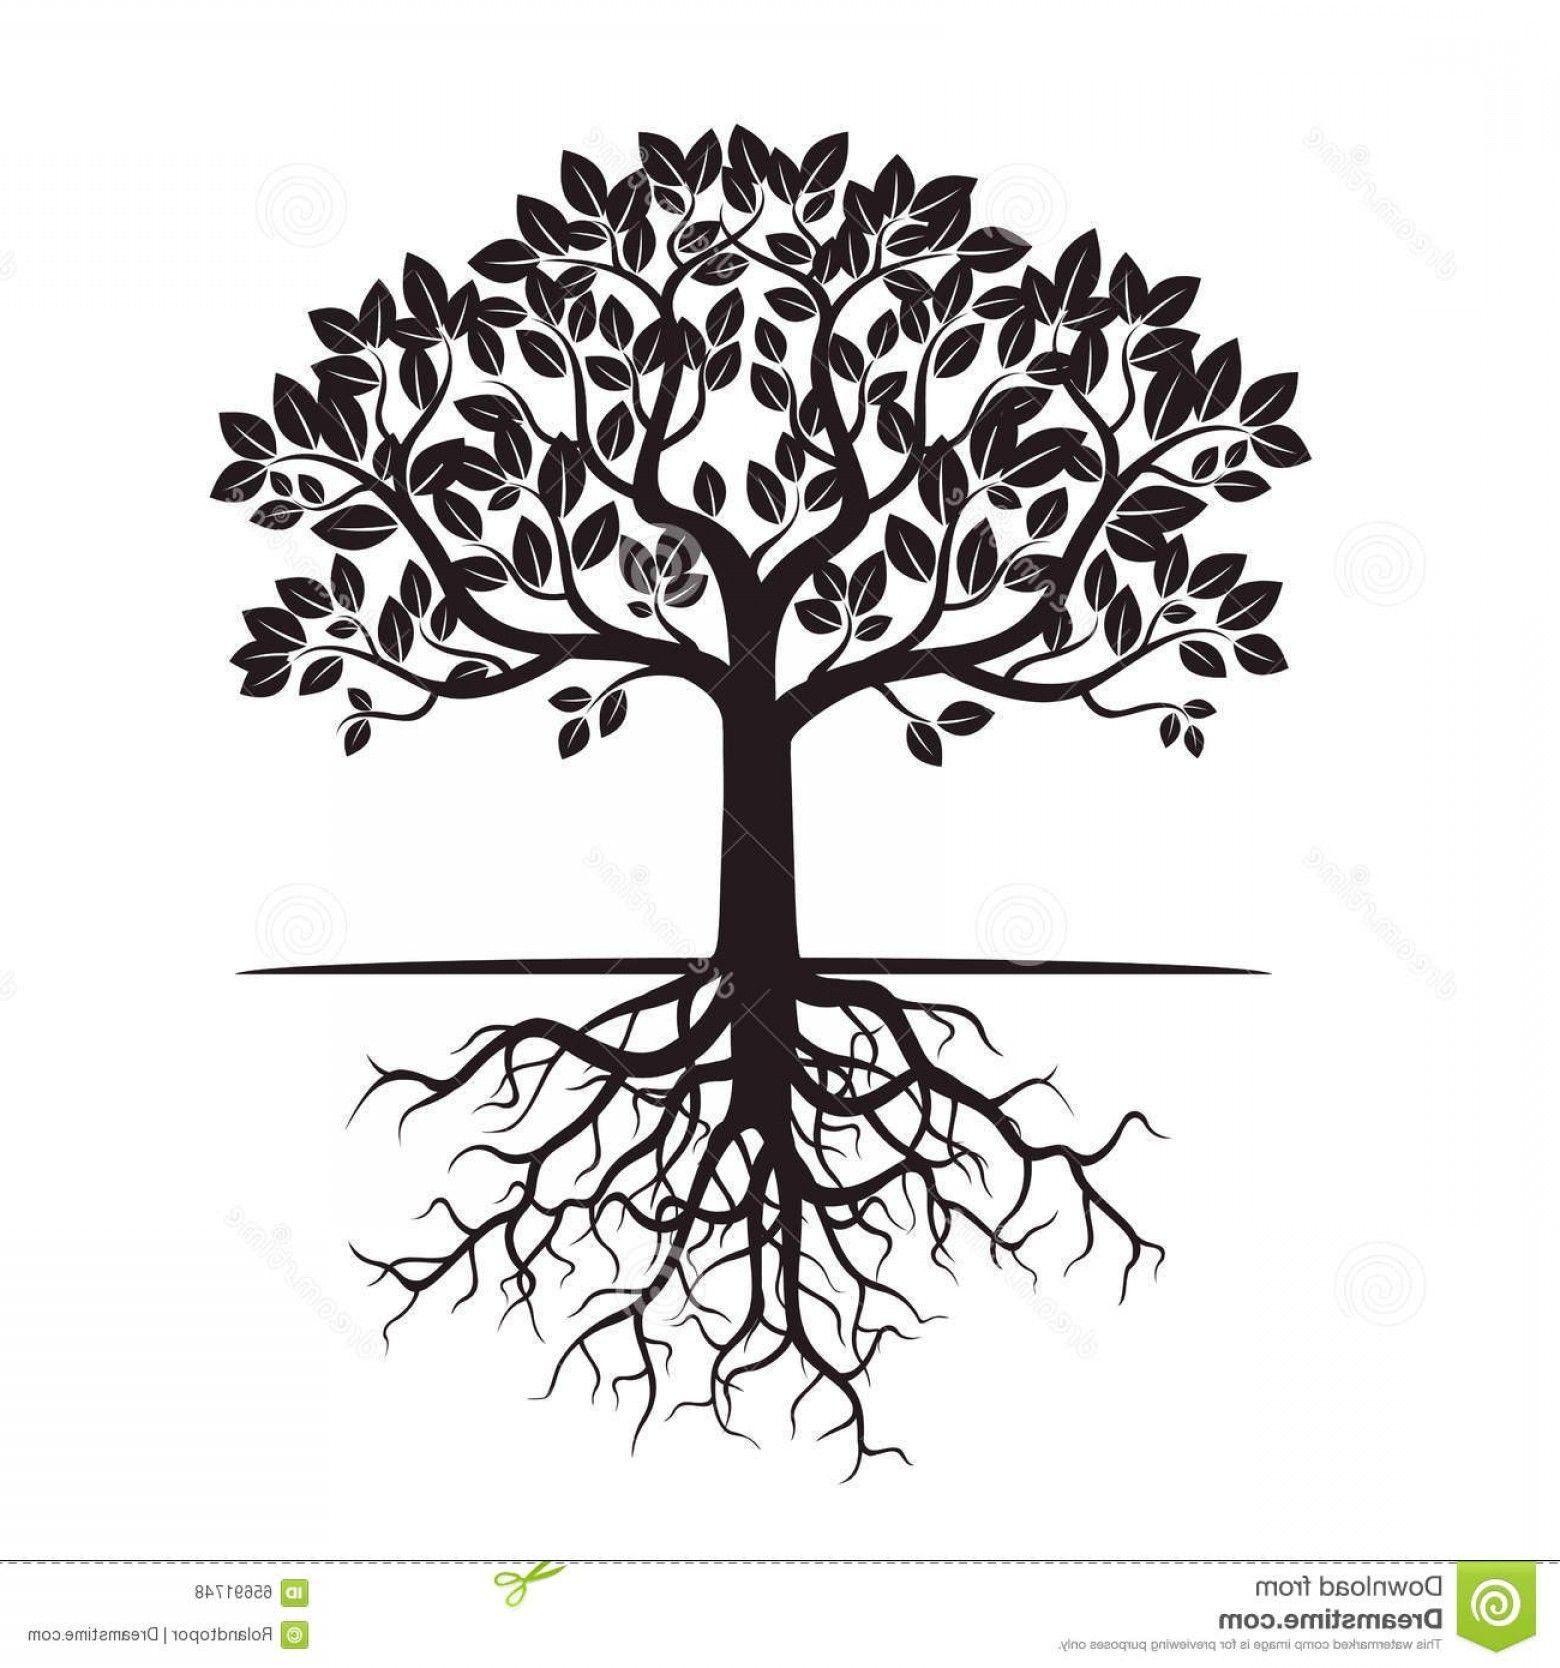 Black Tree with Roots Logo - Stock Illustration Black Tree Roots Vector Illustration Graphic ...